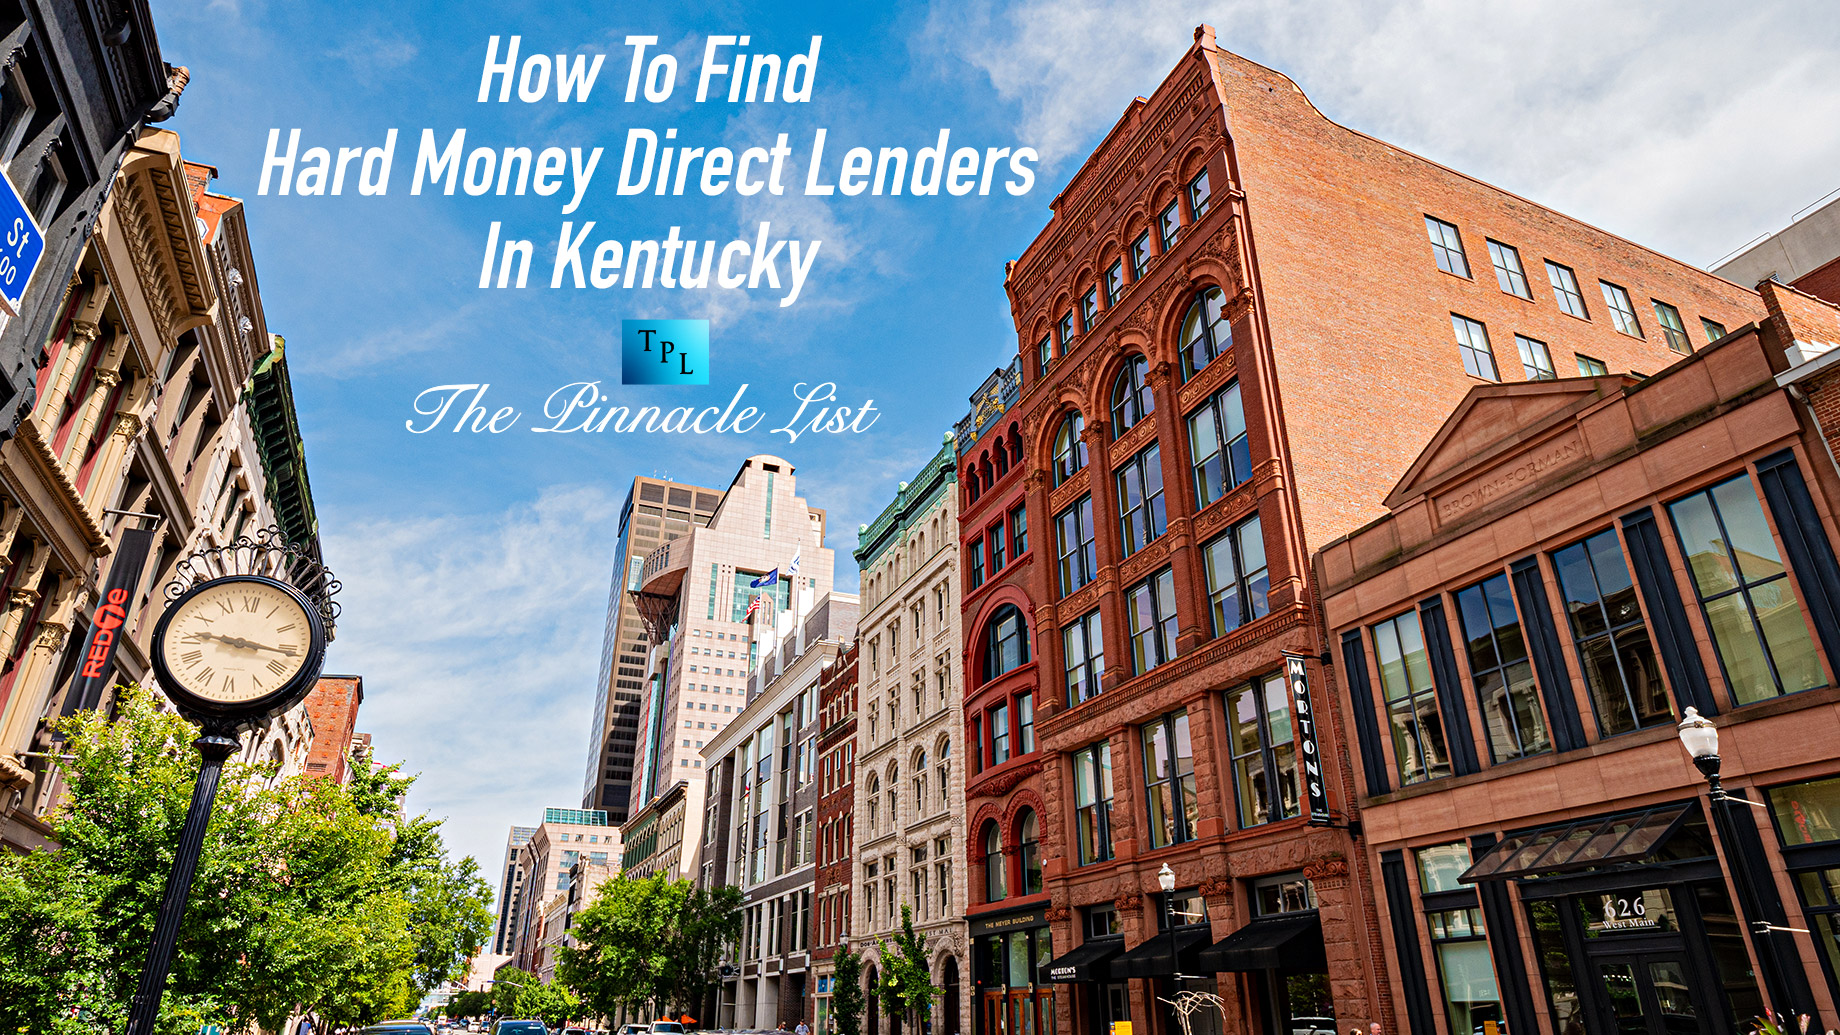 How To Find Hard Money Direct Lenders In Kentucky